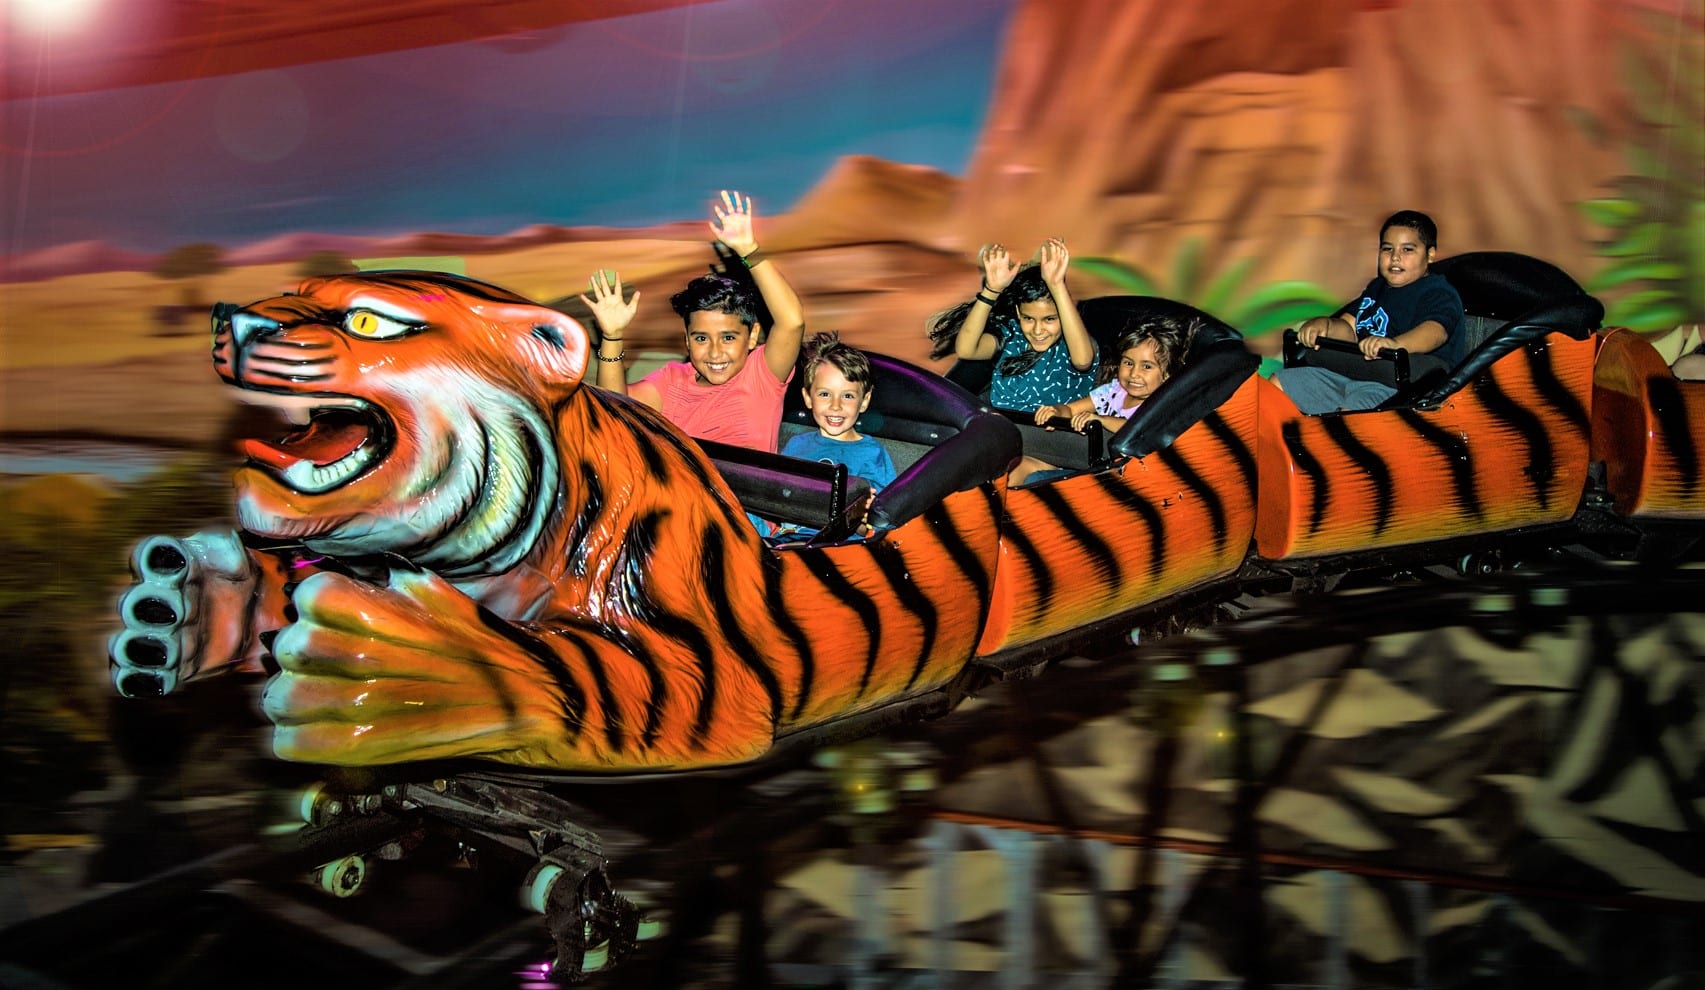 A group of people riding on the back of a tiger roller coaster.